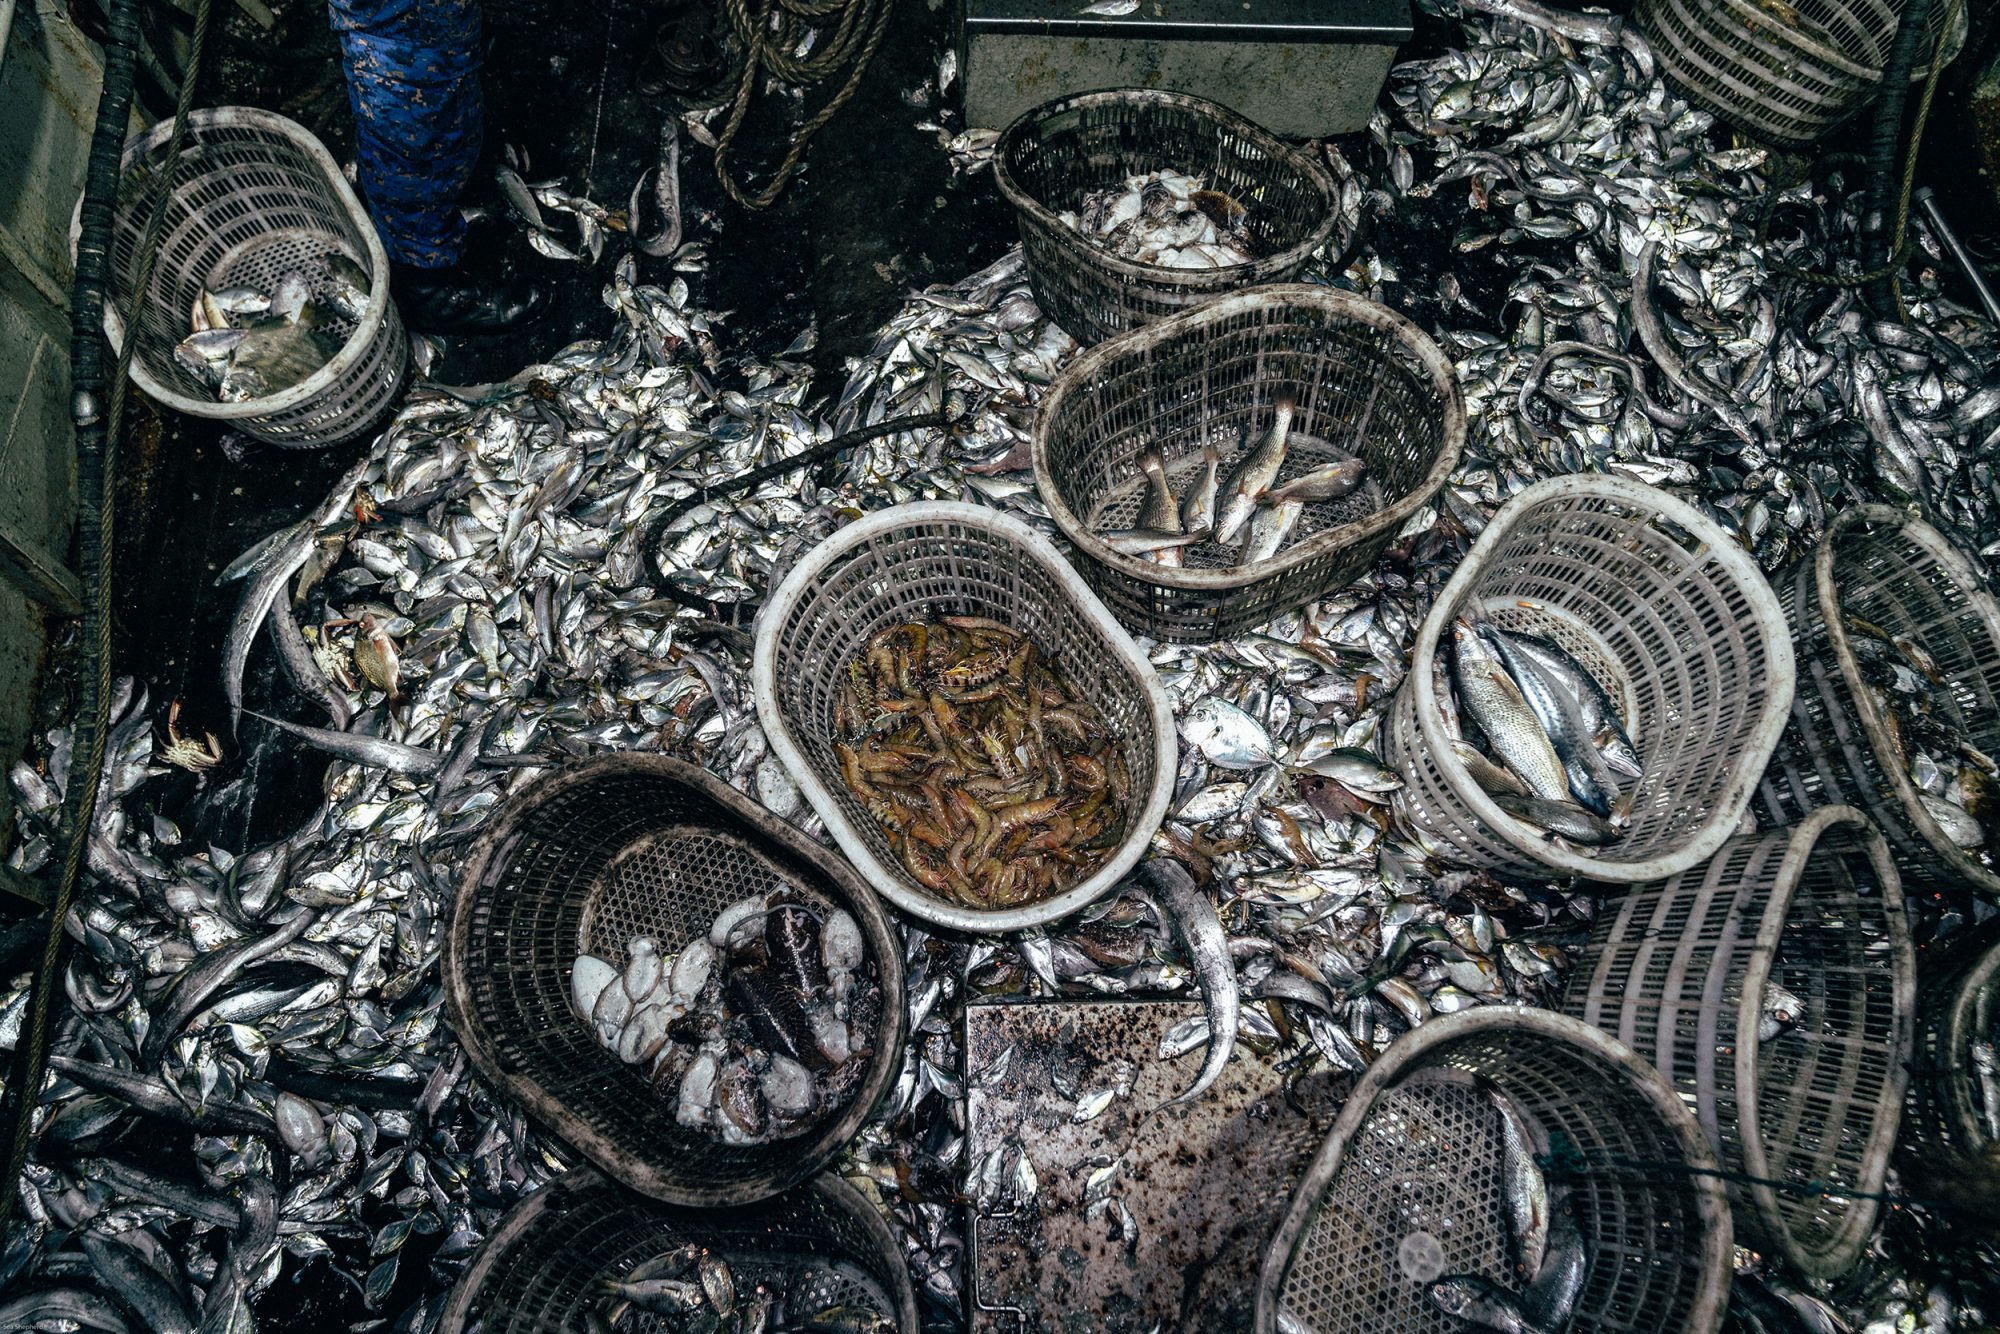 piles of small fish caught by a trawler operating illegally in a protected area off the Gambia’s coast (Image © Leon Greiner / Sea Shepherd)